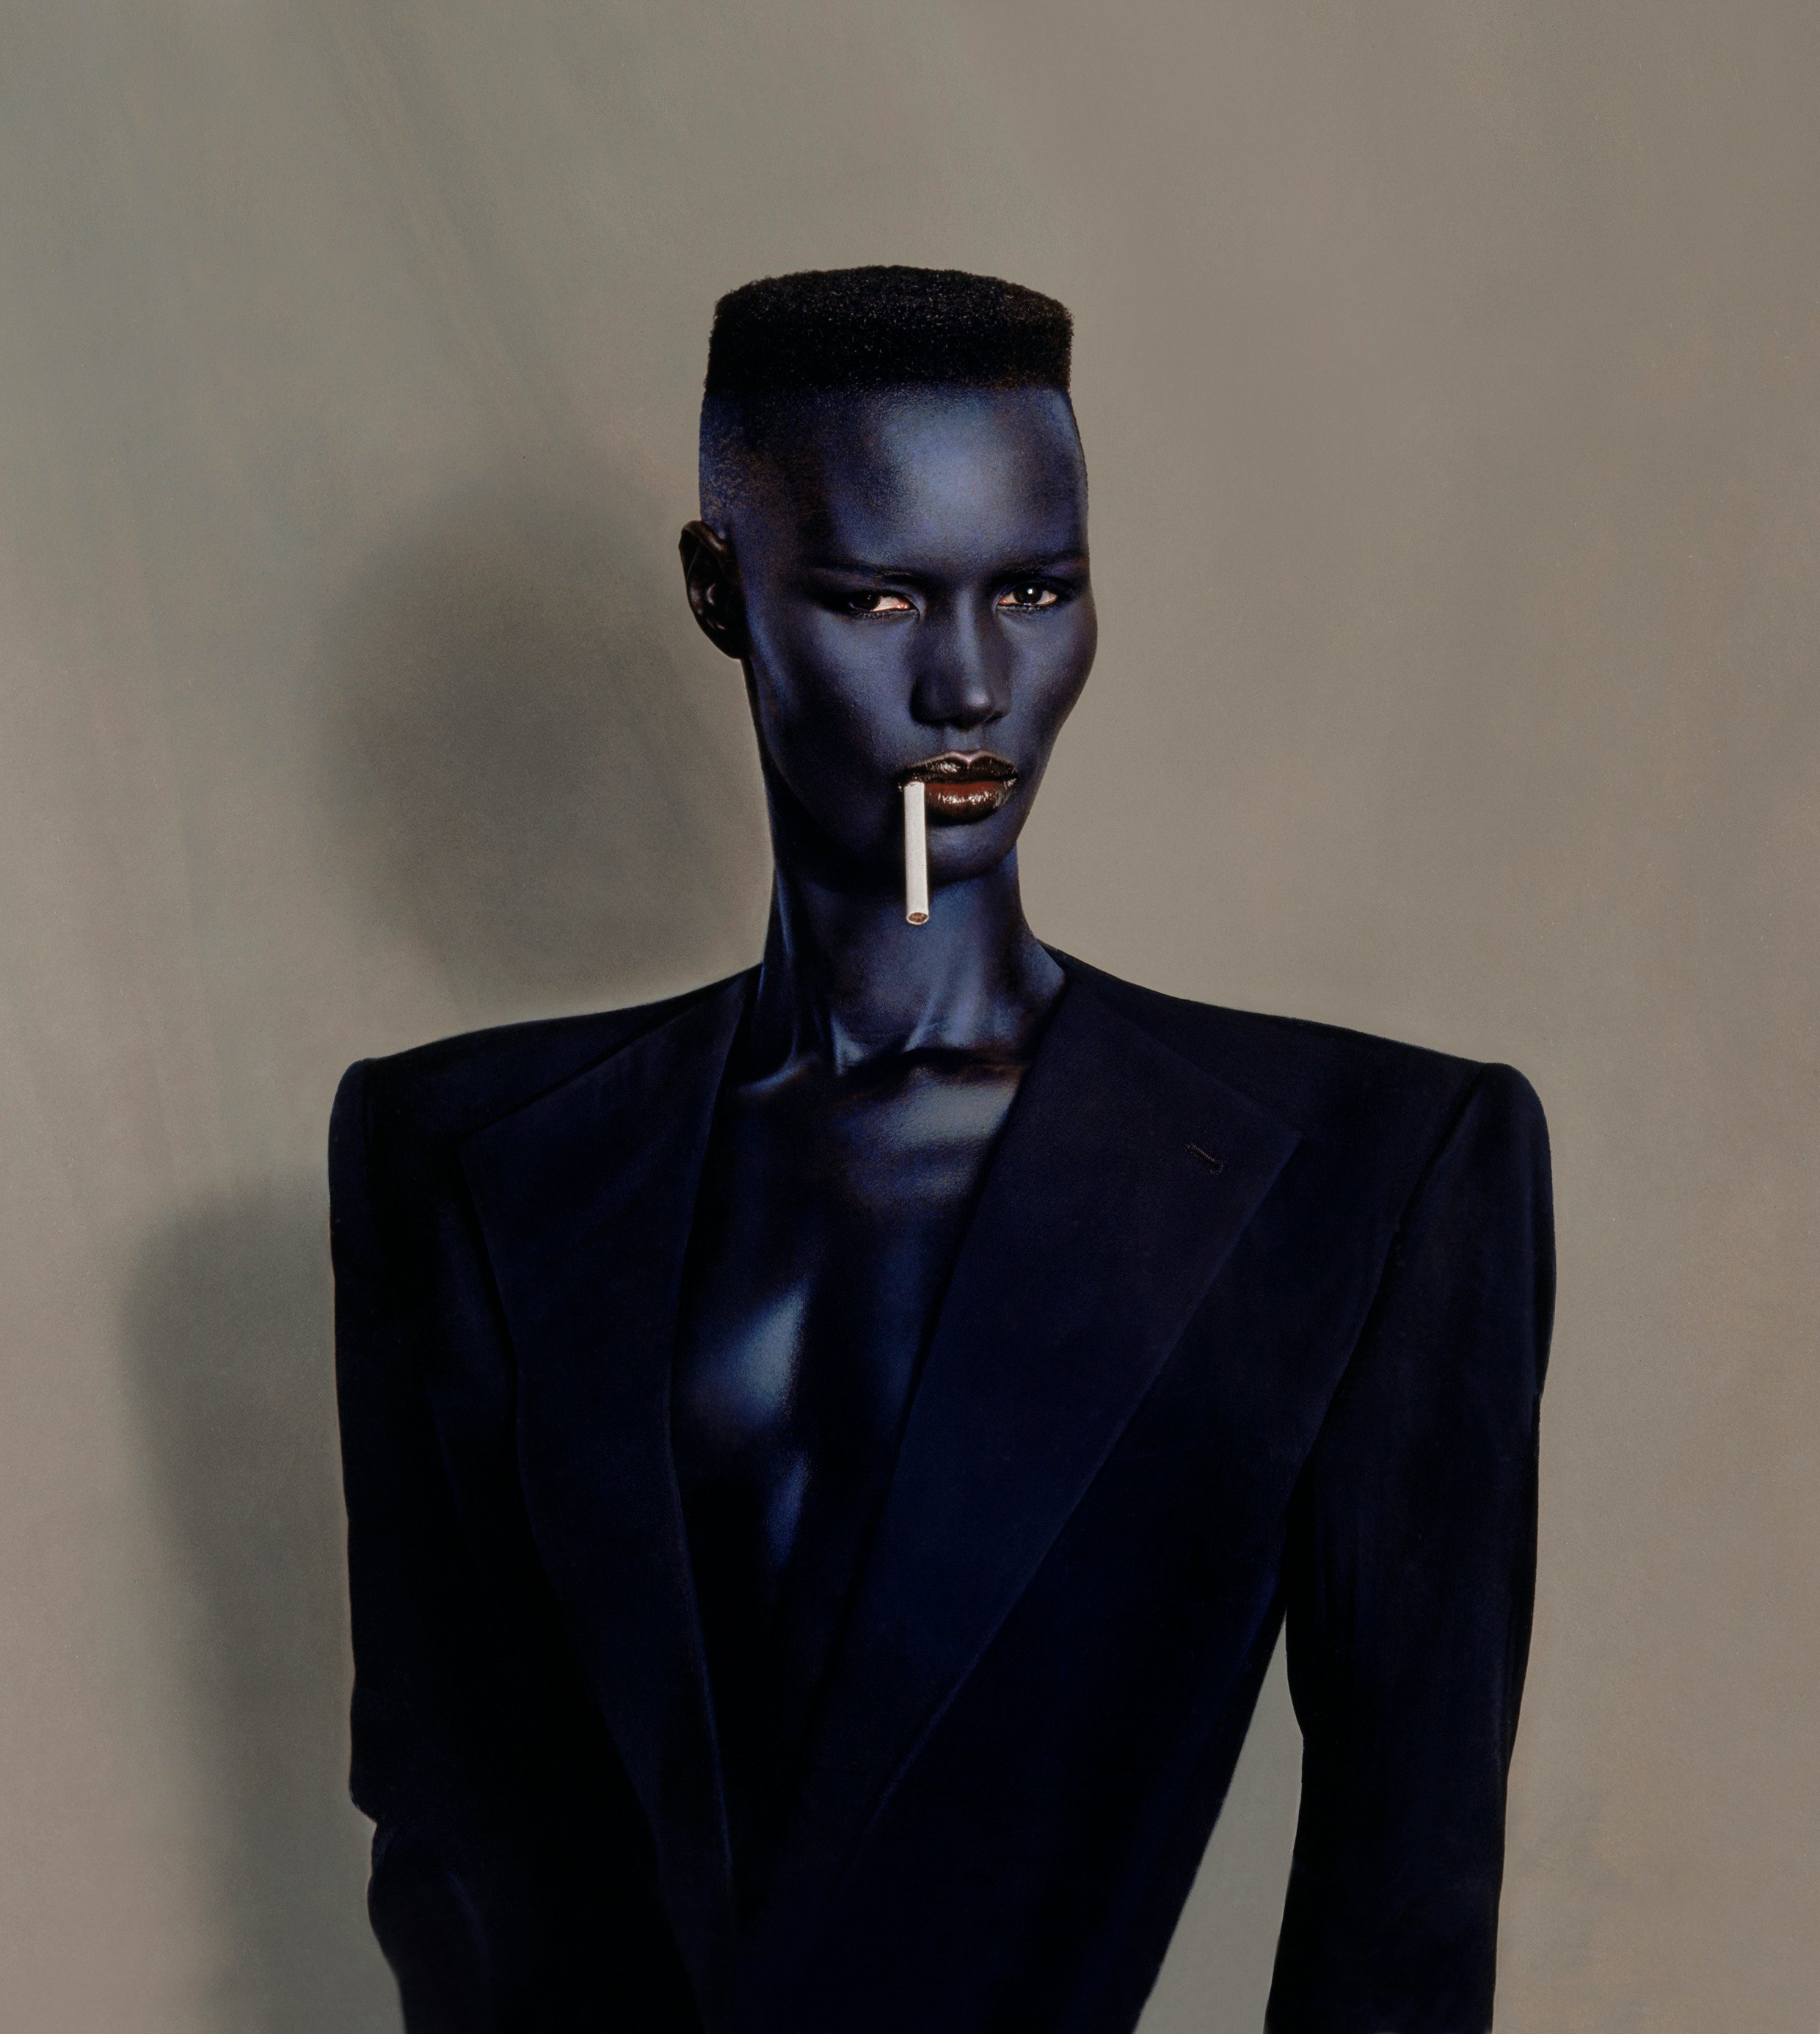 Jean-Paul Goude's 40 Years of Controversy